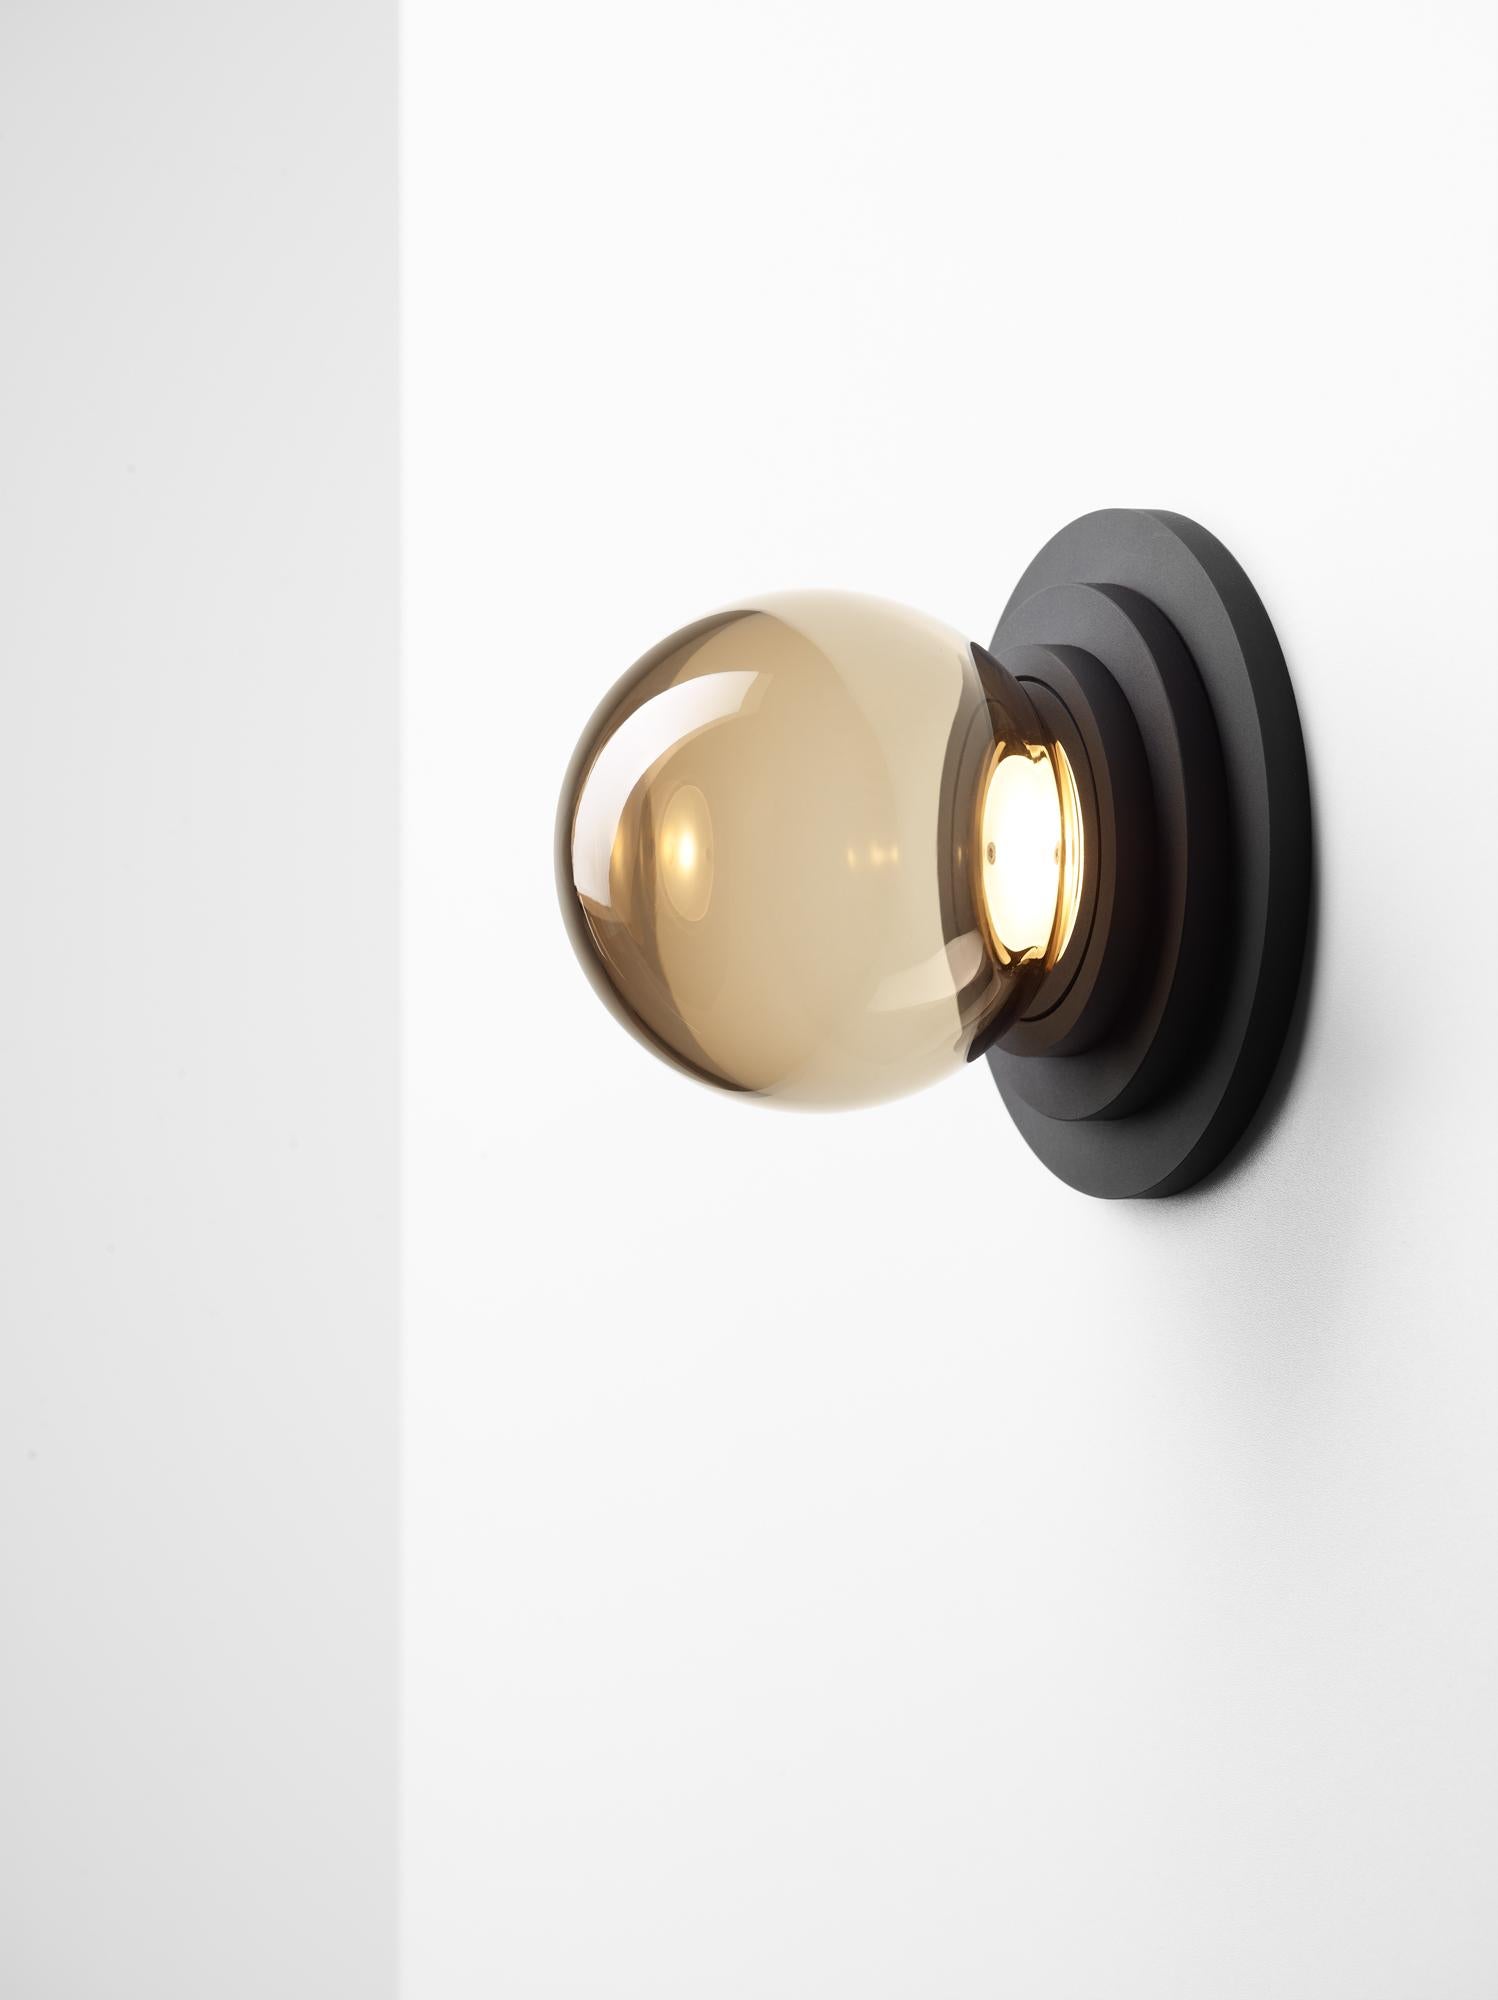 Set Of 2 Black Stratos Mini Ball Wall Light by Dechem Studio
Dimensions: D 12 x H 14 cm
Materials: Aluminum, Glass.
Also Available: Different colours available,

Different shapes of capsules and spheres contrast with anodized alloy fixtures,